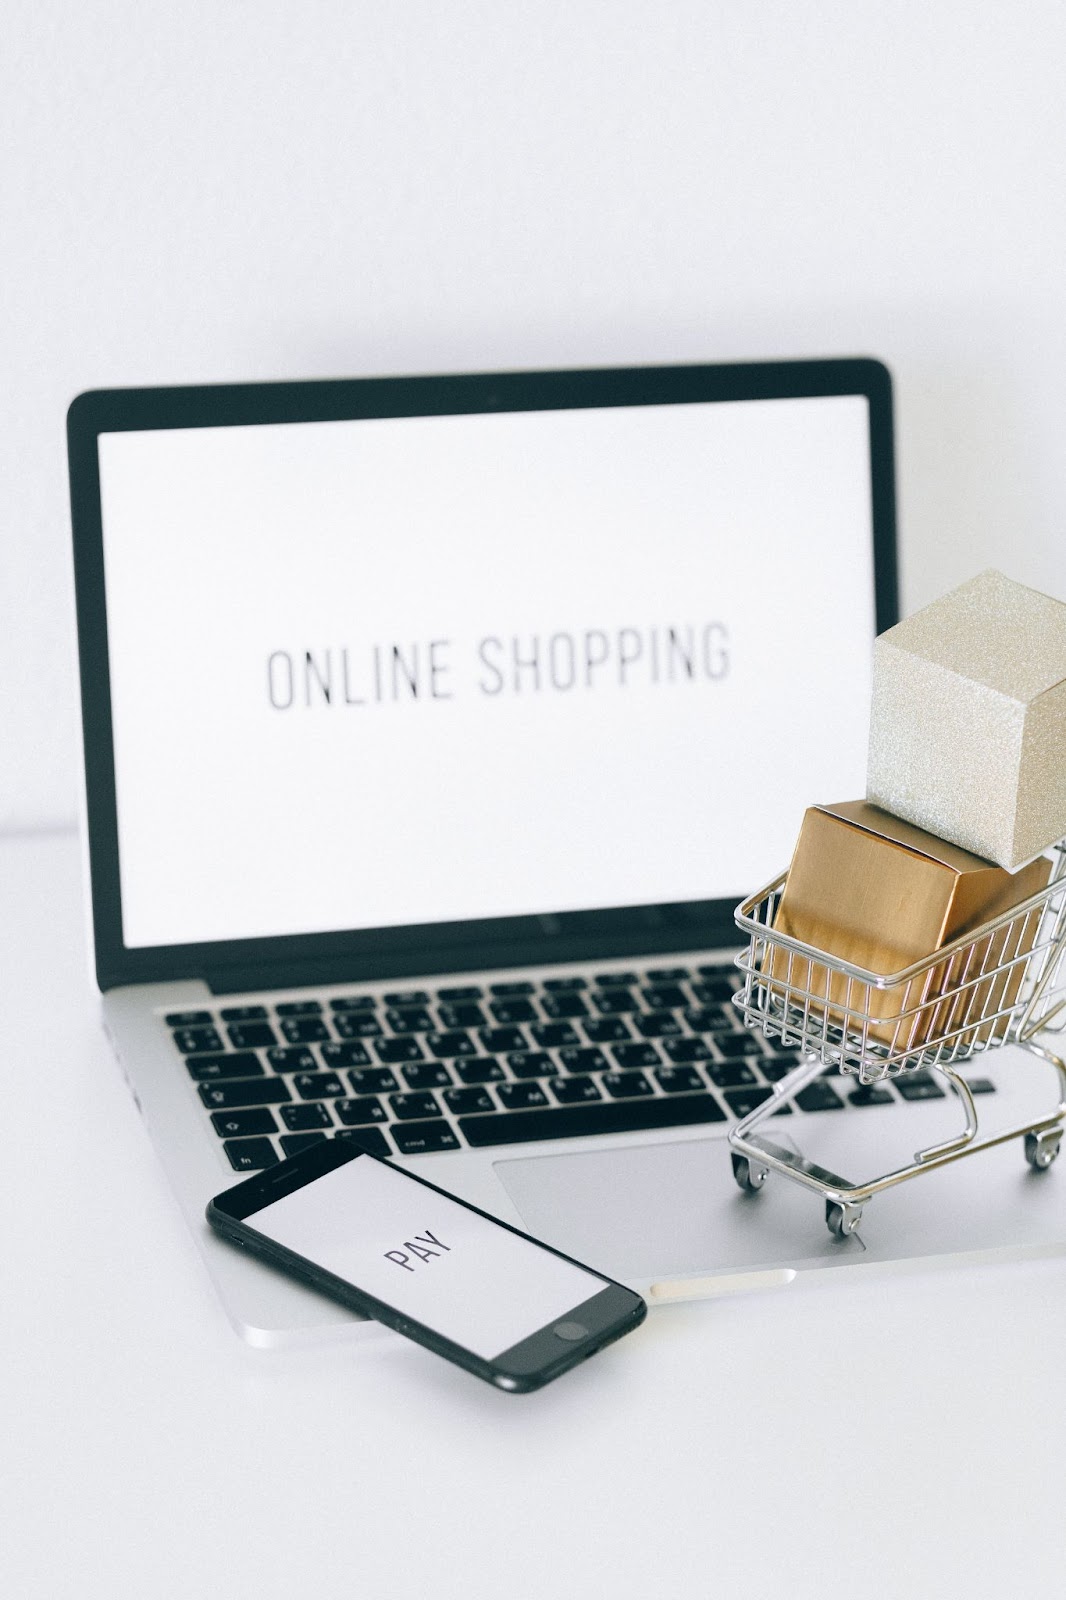 Choosing an e-commerce platform that integrates well with your other business systems will save you time and resources.